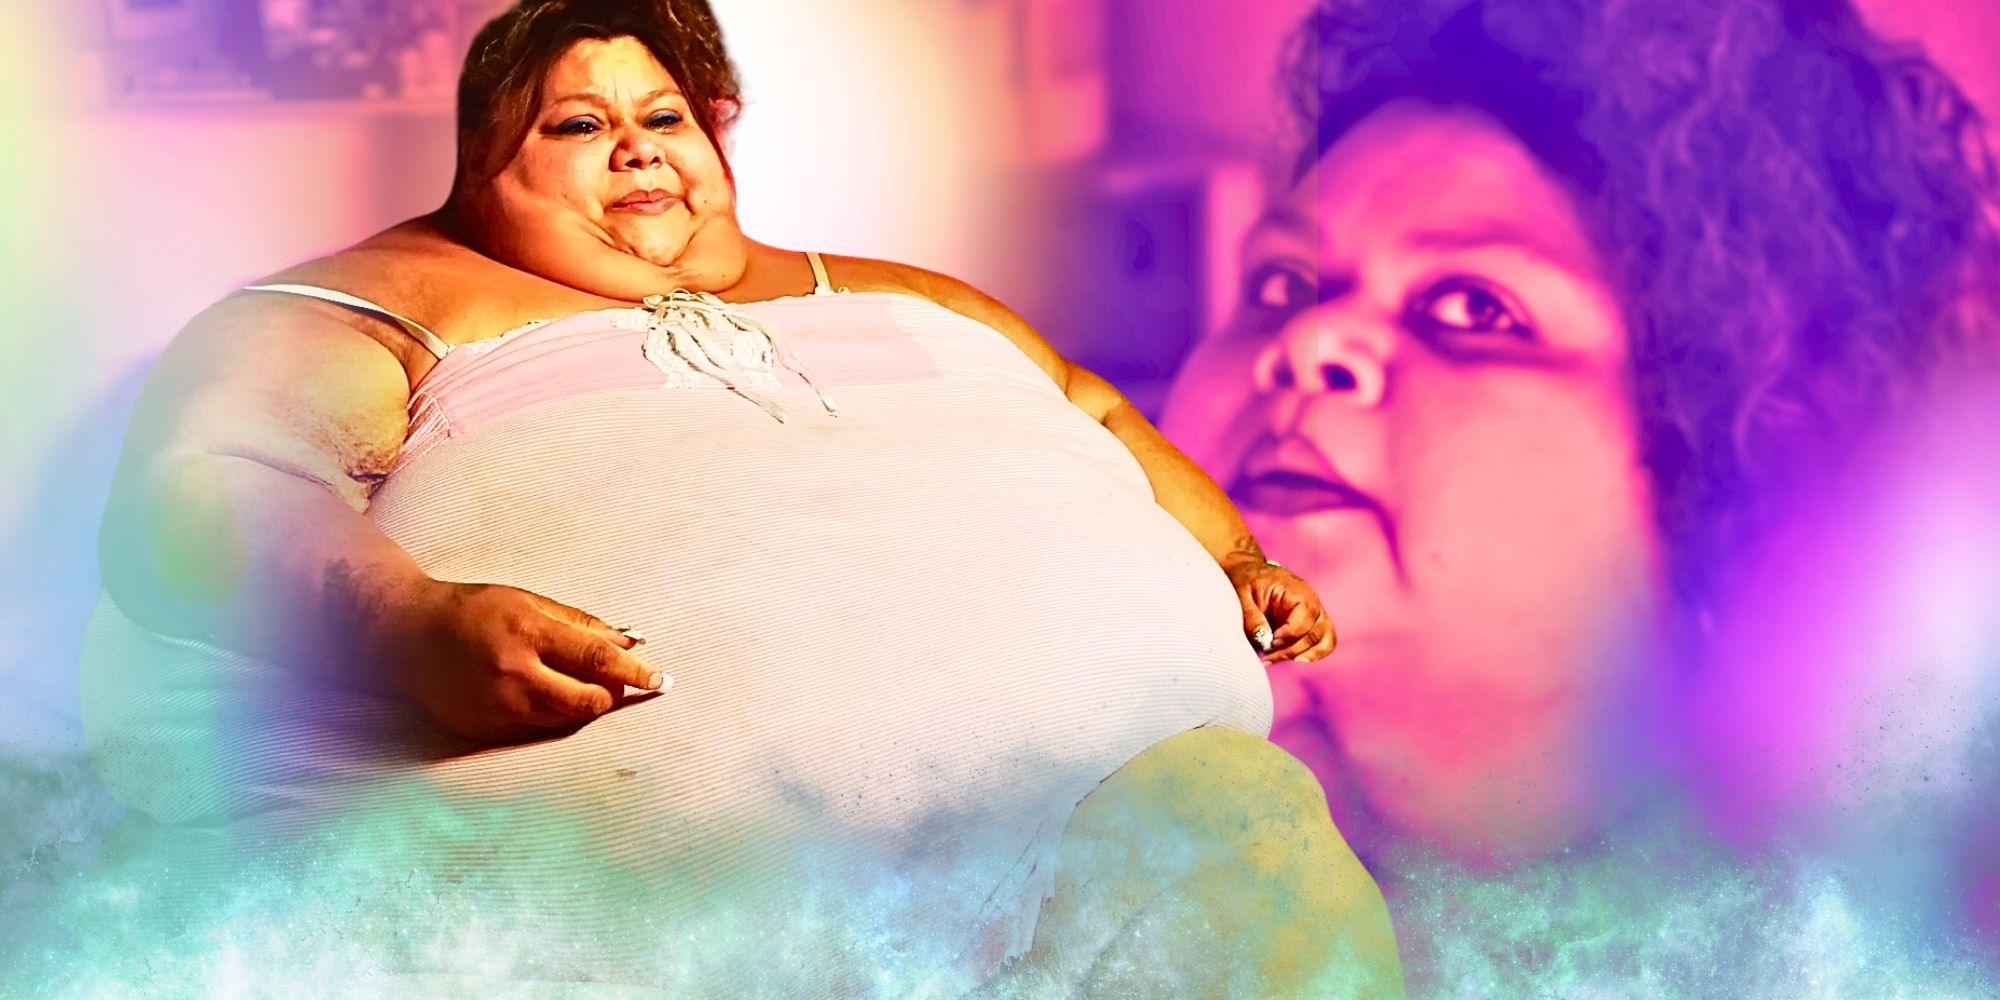 Lupe from My 600-Lb Life multicolored background